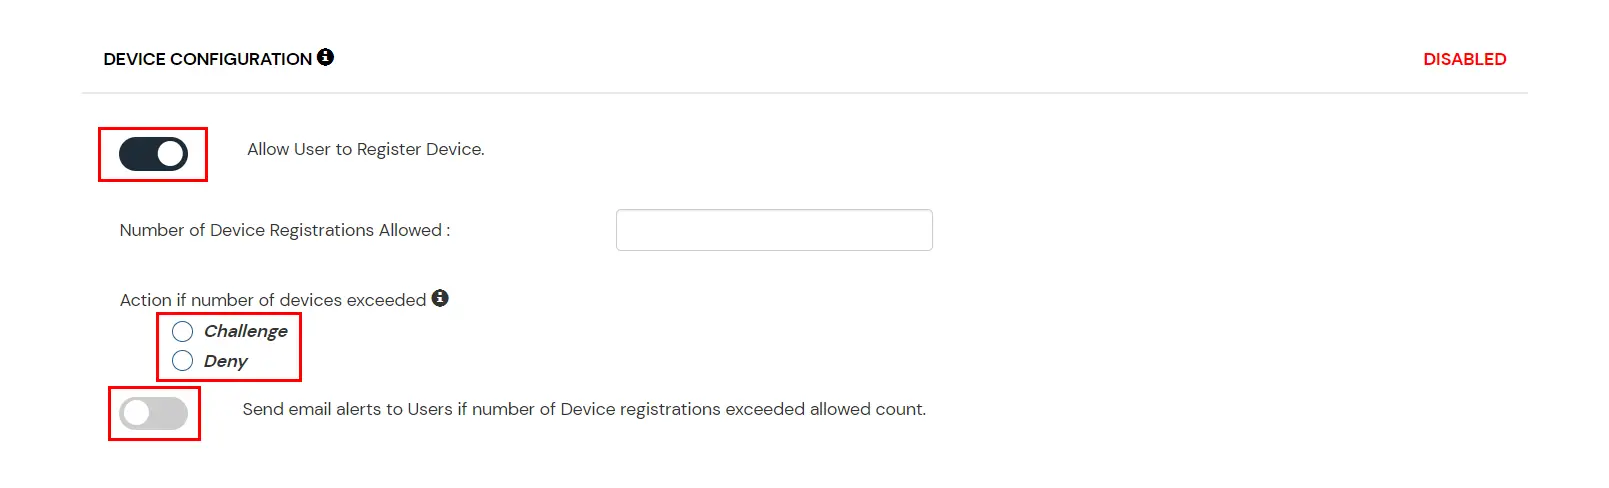 Adaptive Authentication: Device Restriction